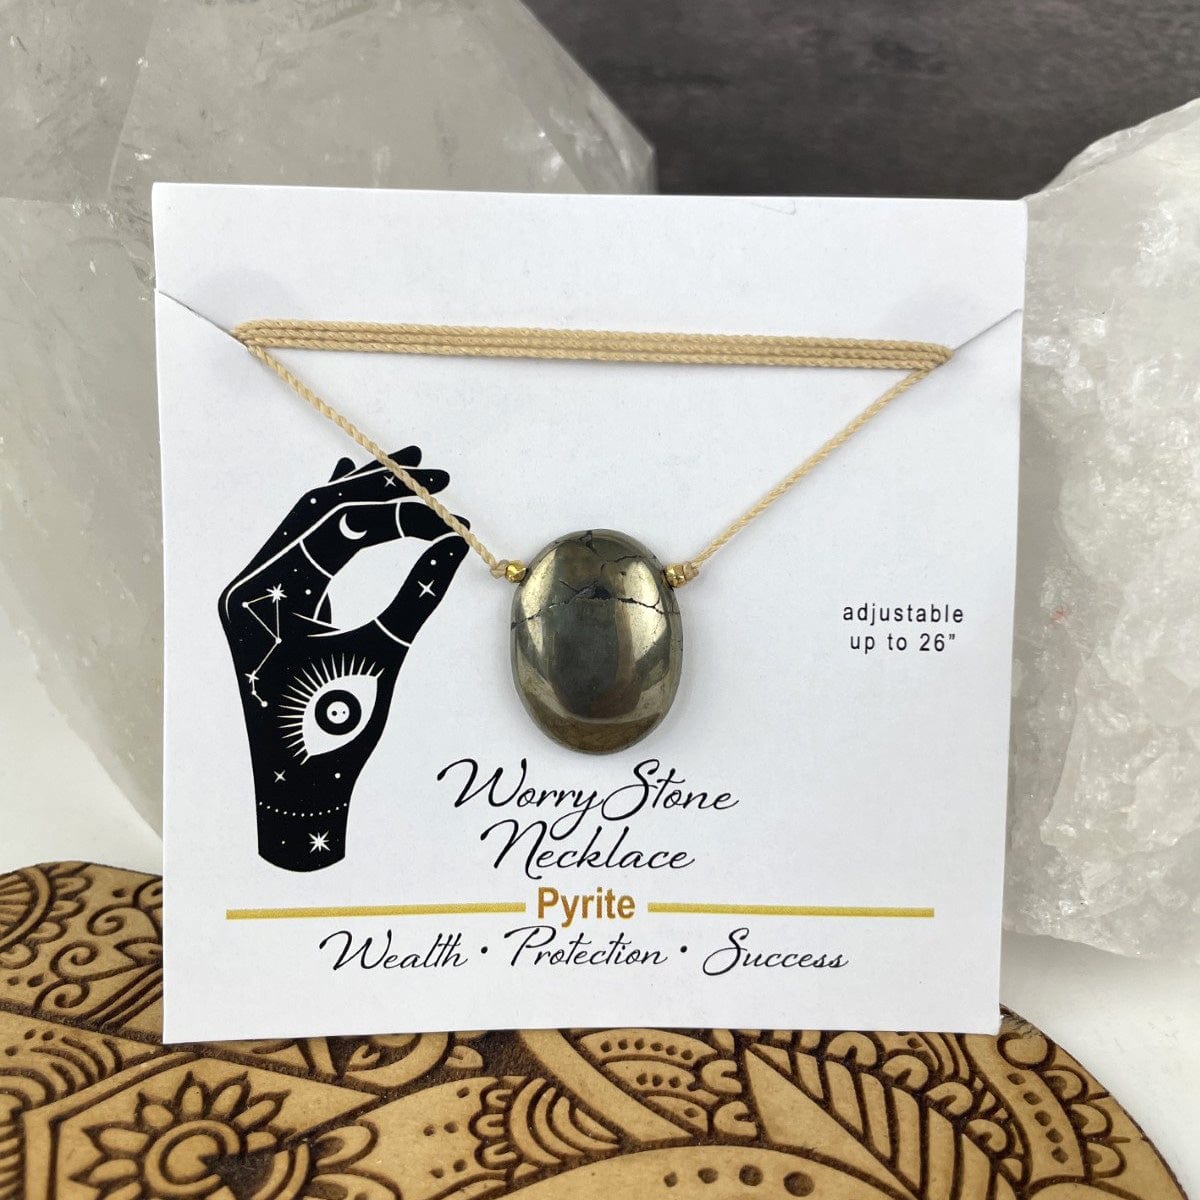 Pyrite worry stone necklace on a card